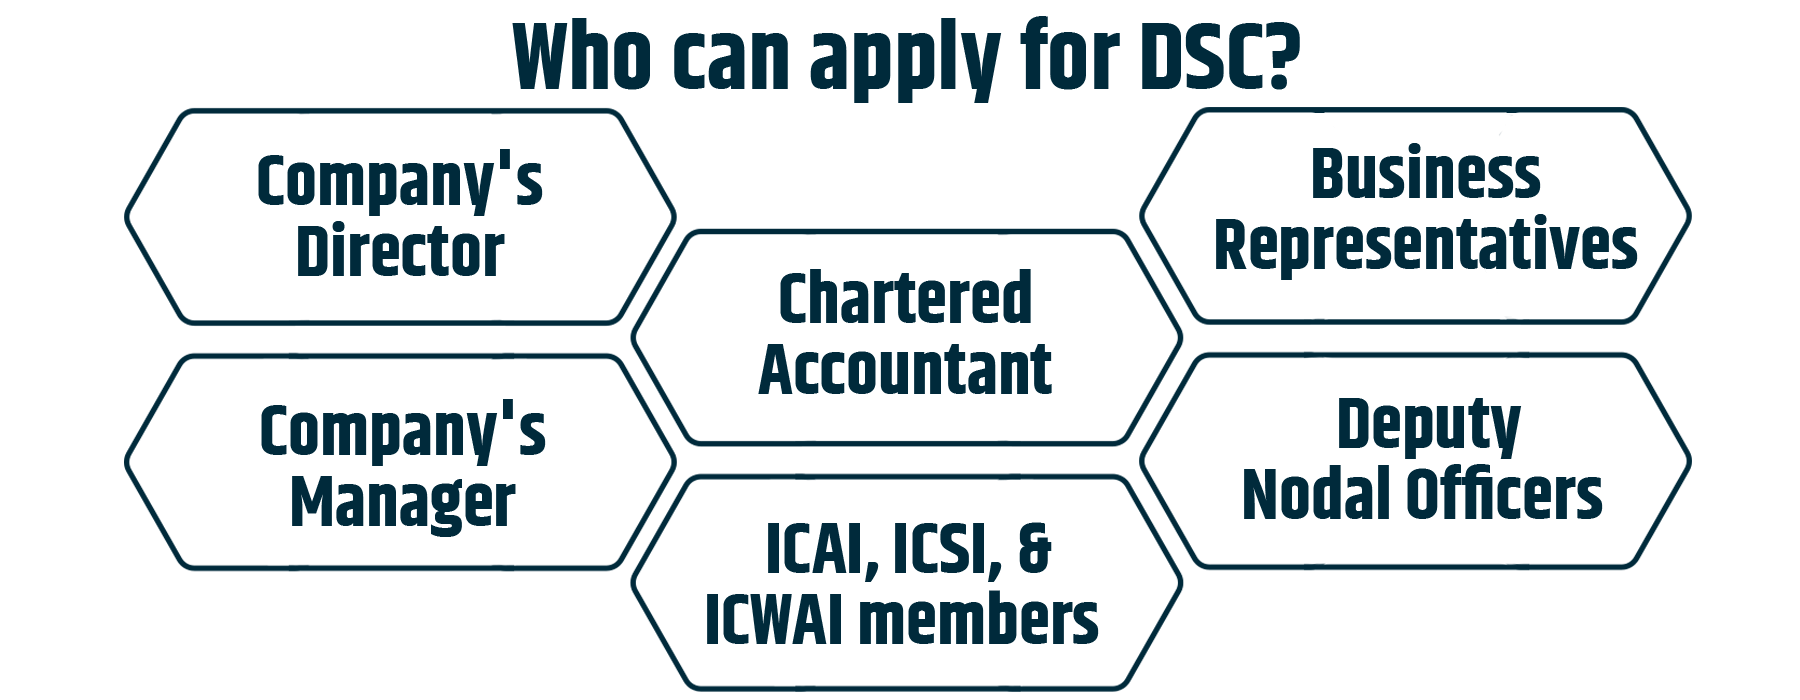 a list individual entites that are allowed to apply for dsc registration